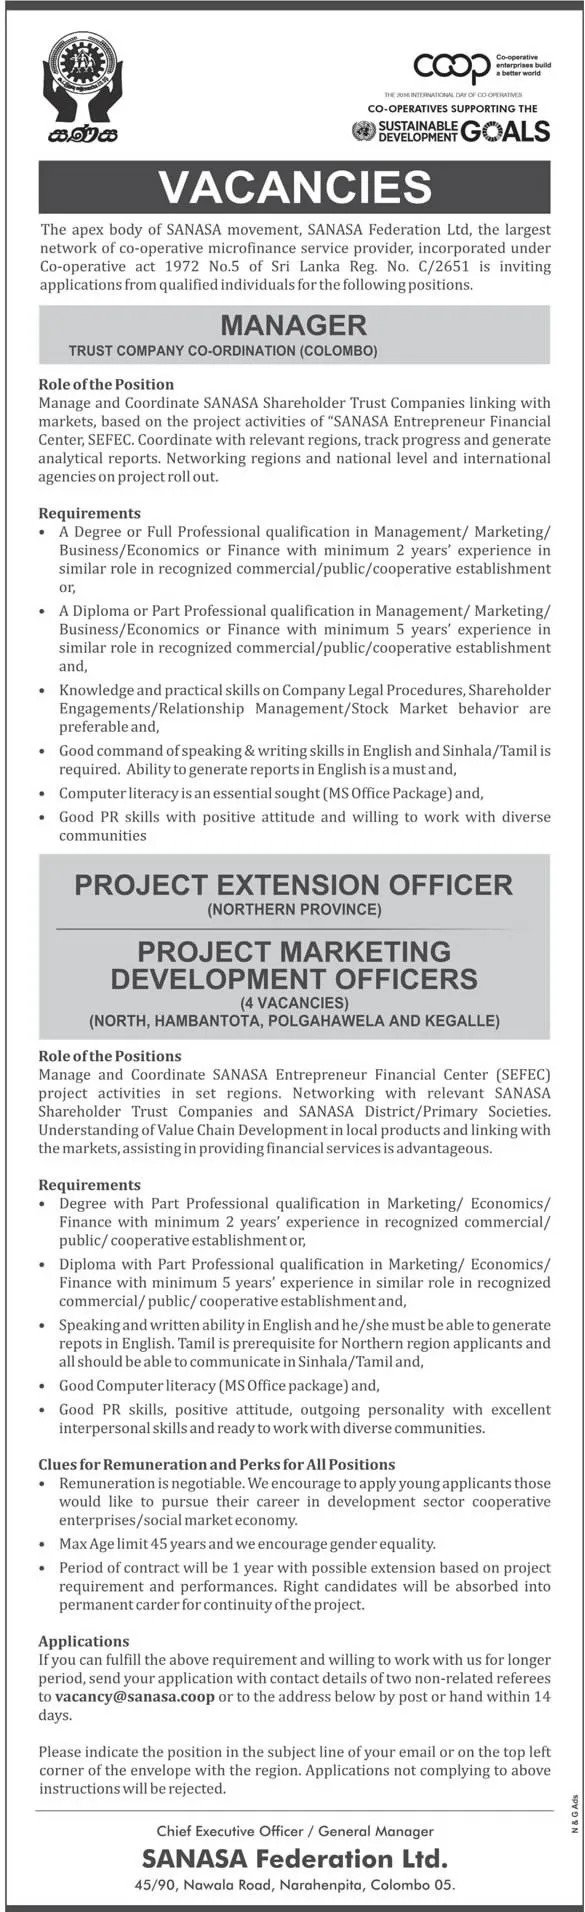 Manager / Project Extension Officer / Project Marketing Development Officer - SANASA